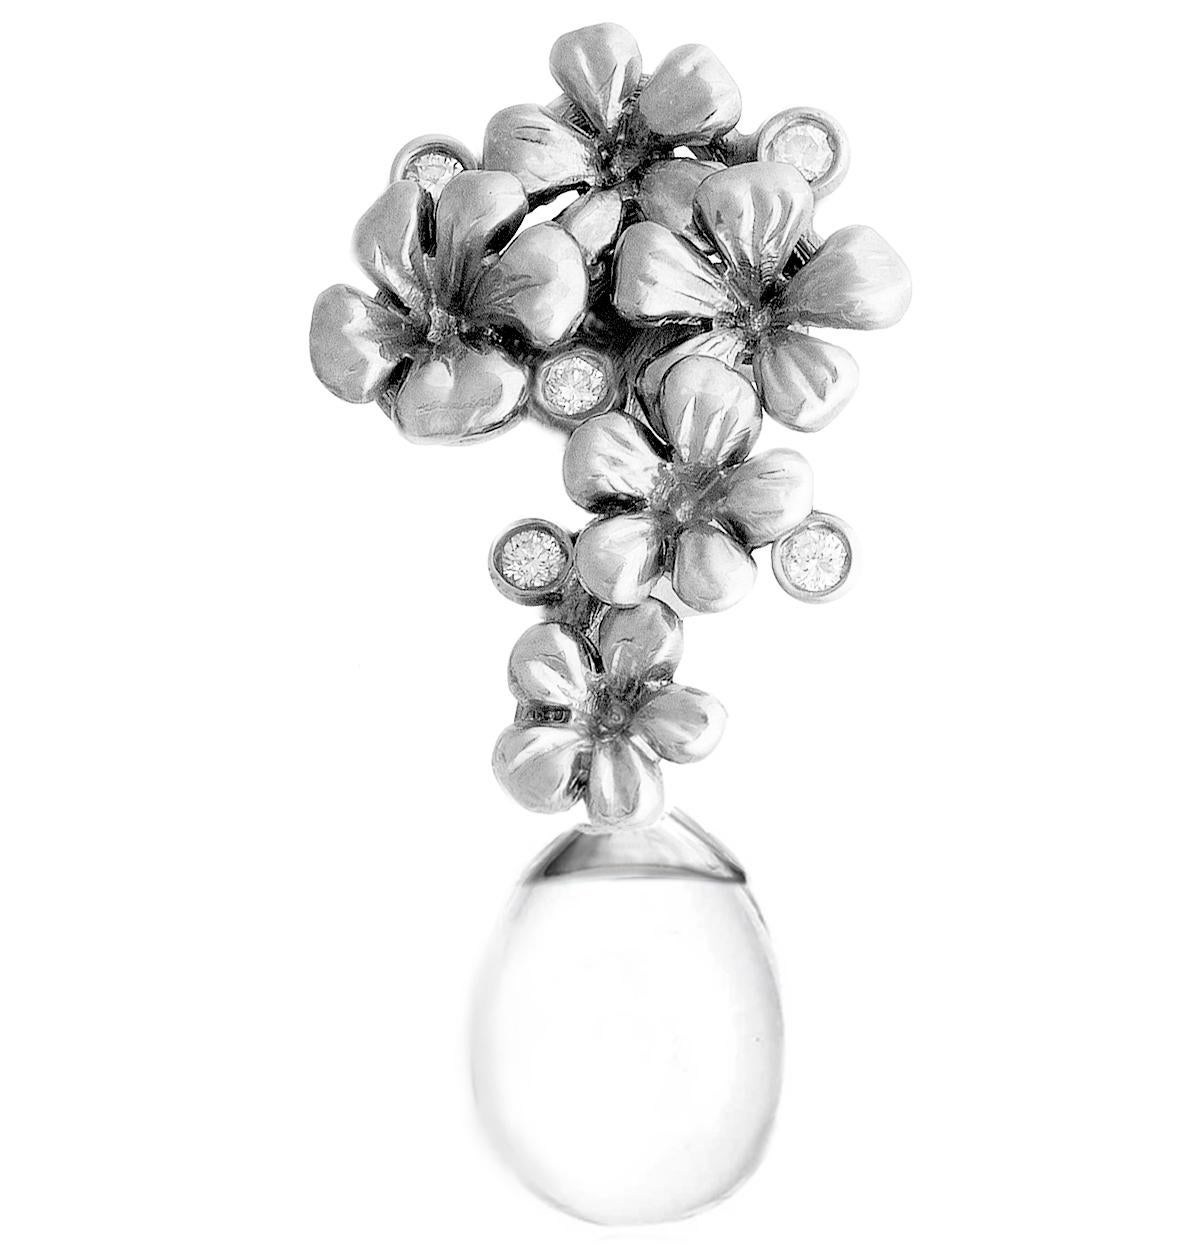 These Plum Blossom cocktail earrings by the artist are made of 18 karat white gold and encrusted with 10 round diamonds and quartz cabochon drops, which can be taken off and on. This jewelry collection was featured in a Vogue UA review.

The unique